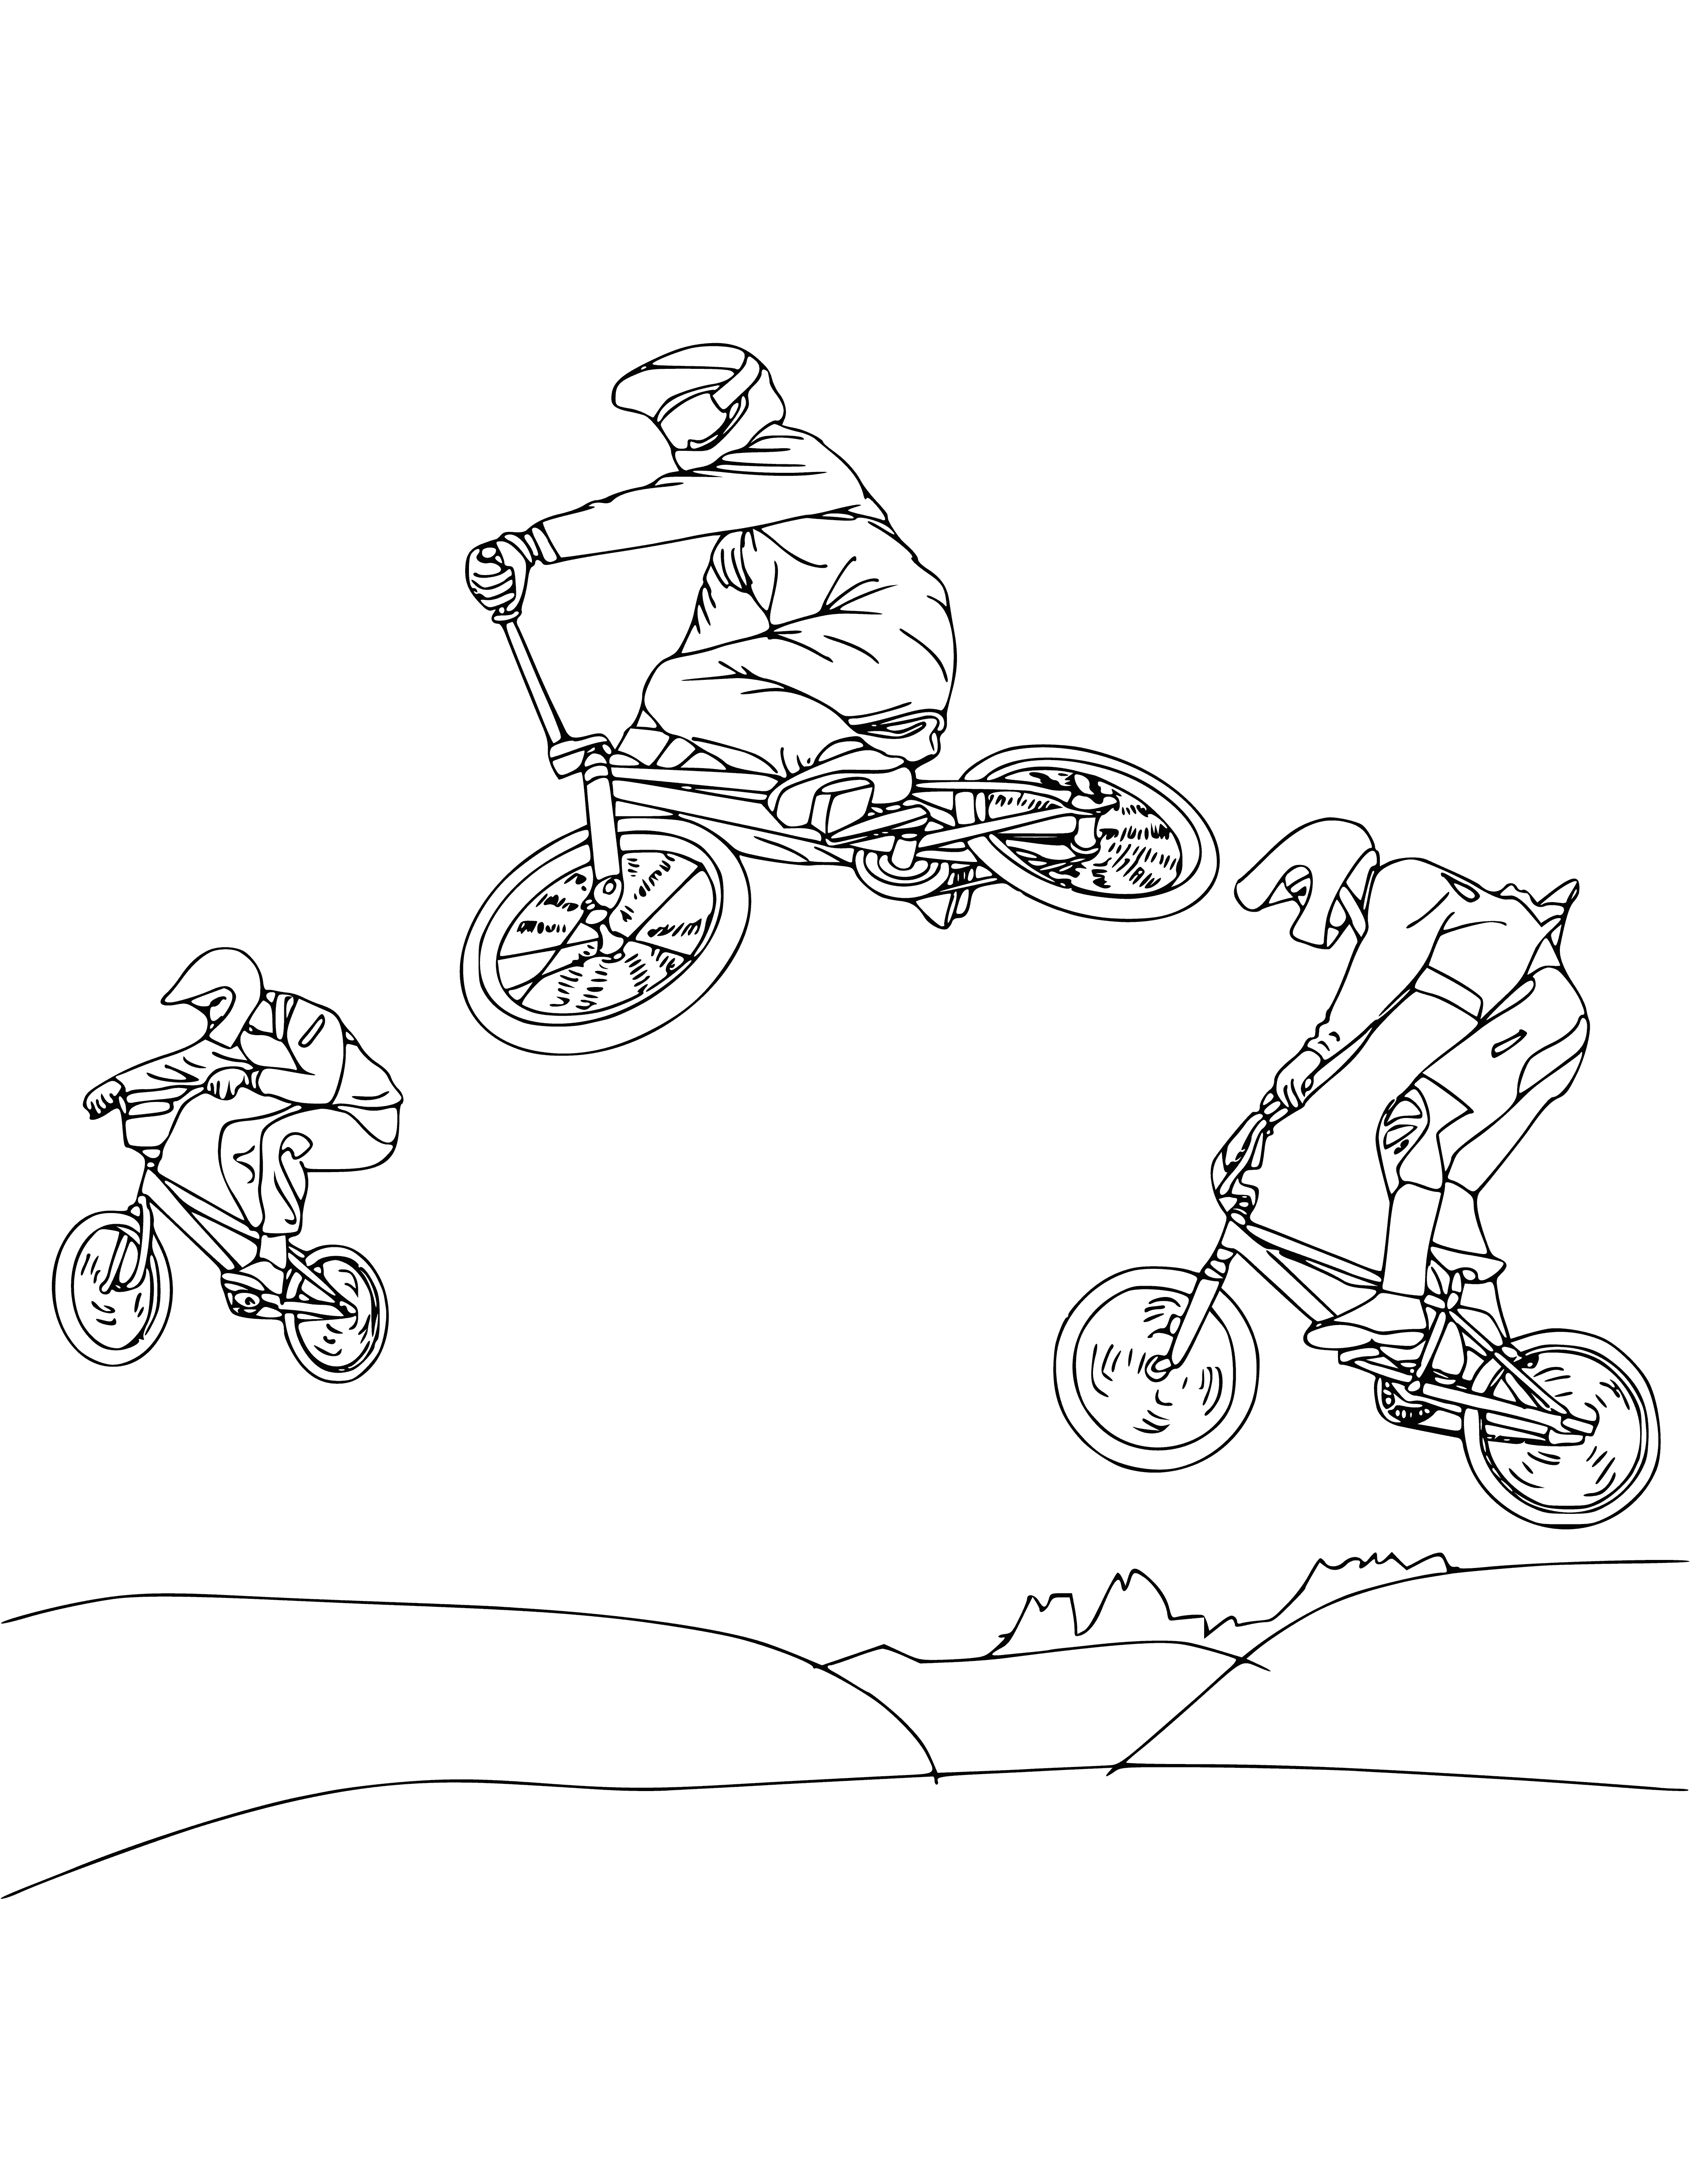 coloring page: Riding a bike in a park wearing a helmet & gloves, bike w/ higher handlebars & a backpack. #GoGreen